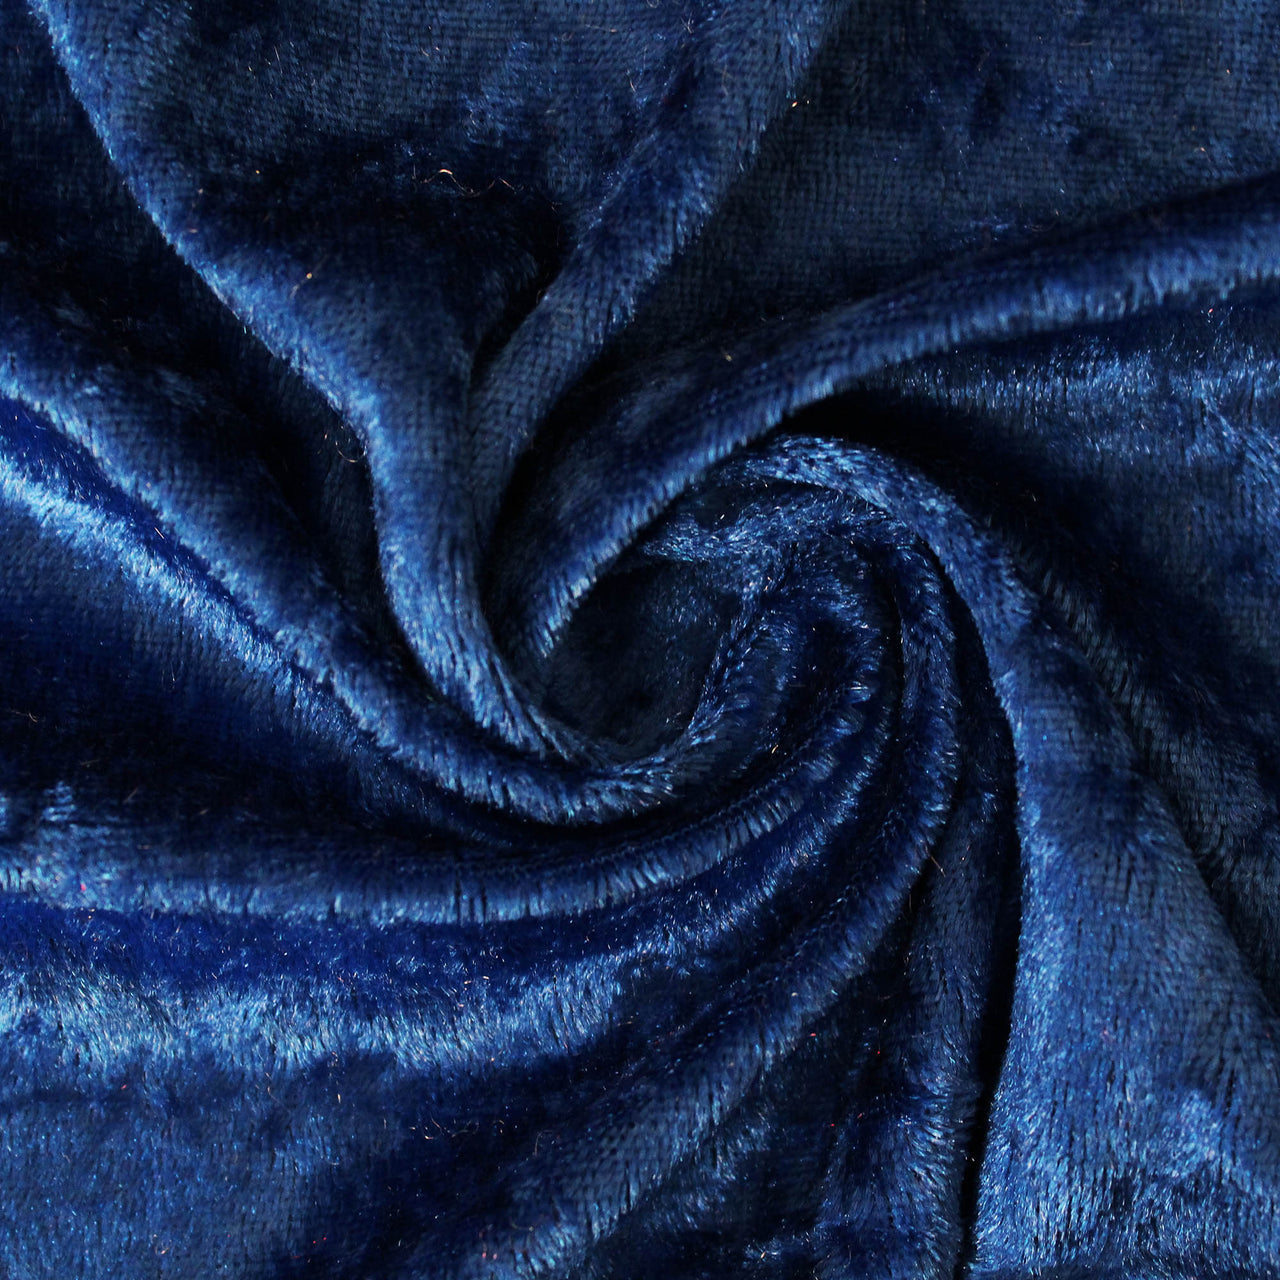 Royal Blue - Crushed Velvet Velour Fabric - Natural One Way Stretch For Costumes & Drapes